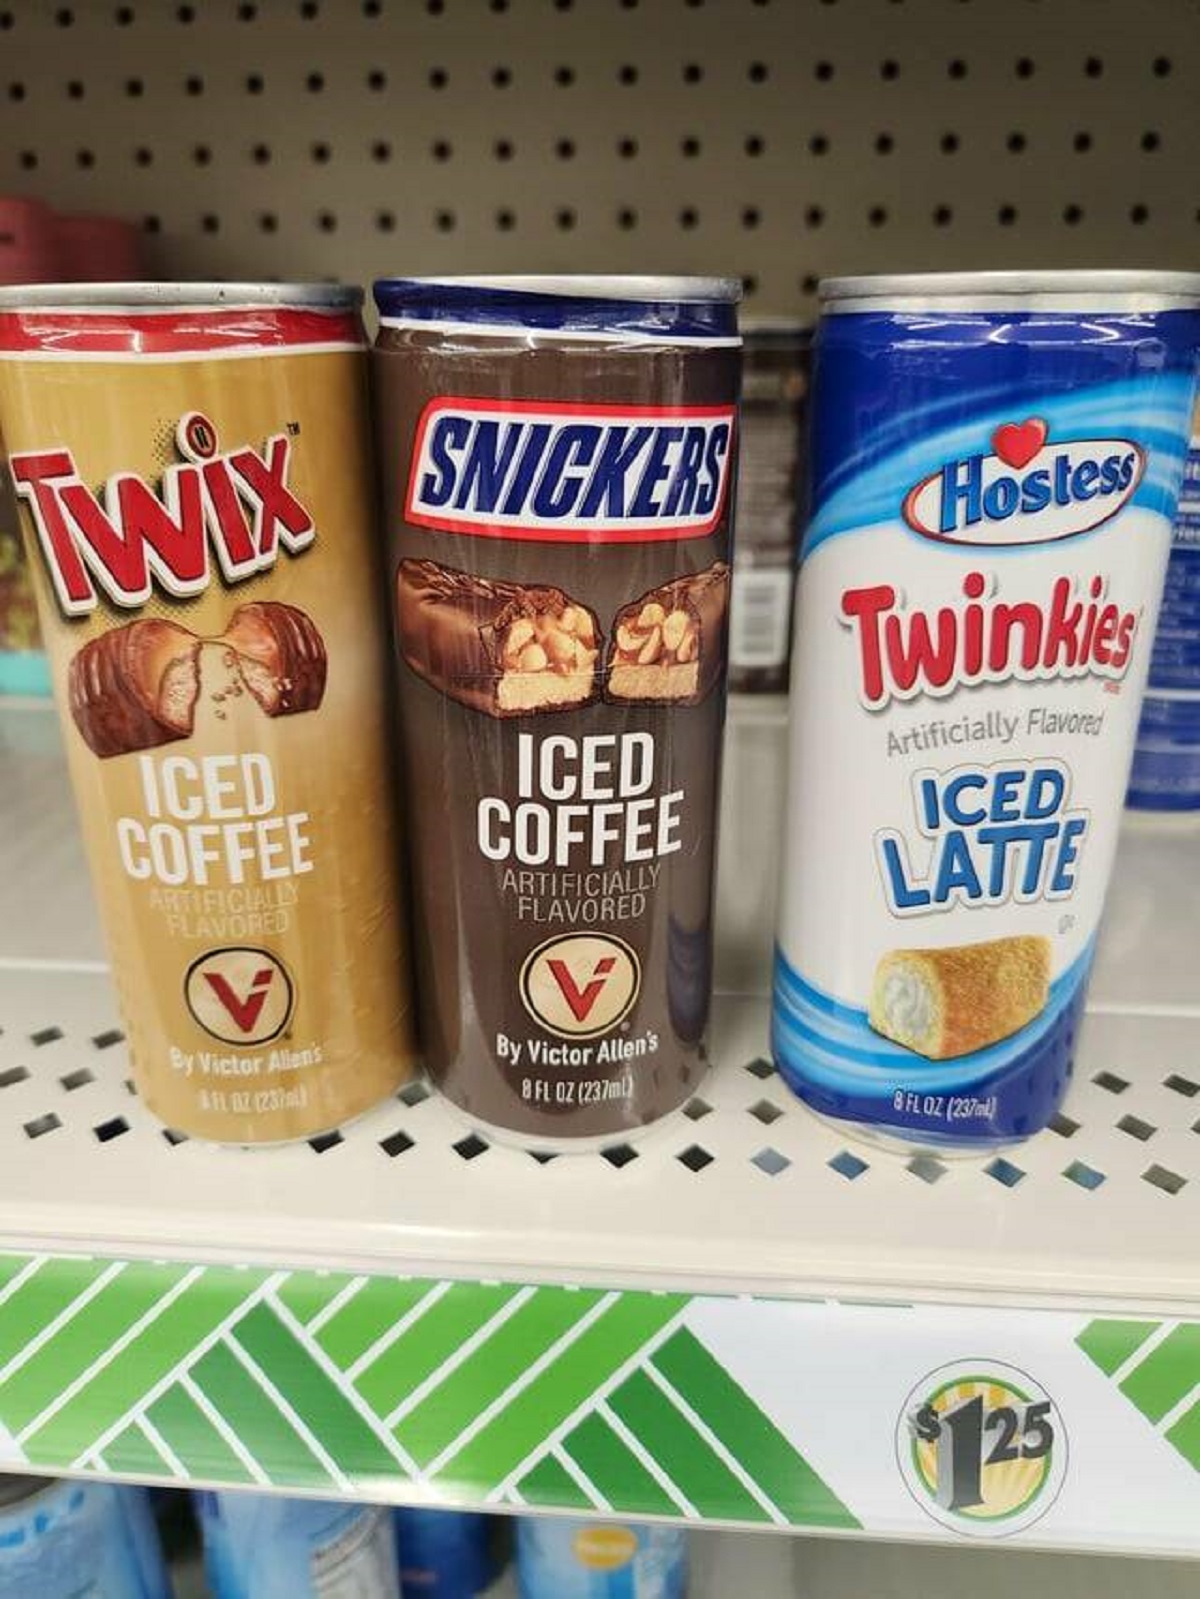 "Snack flavored coffee drinks in America"